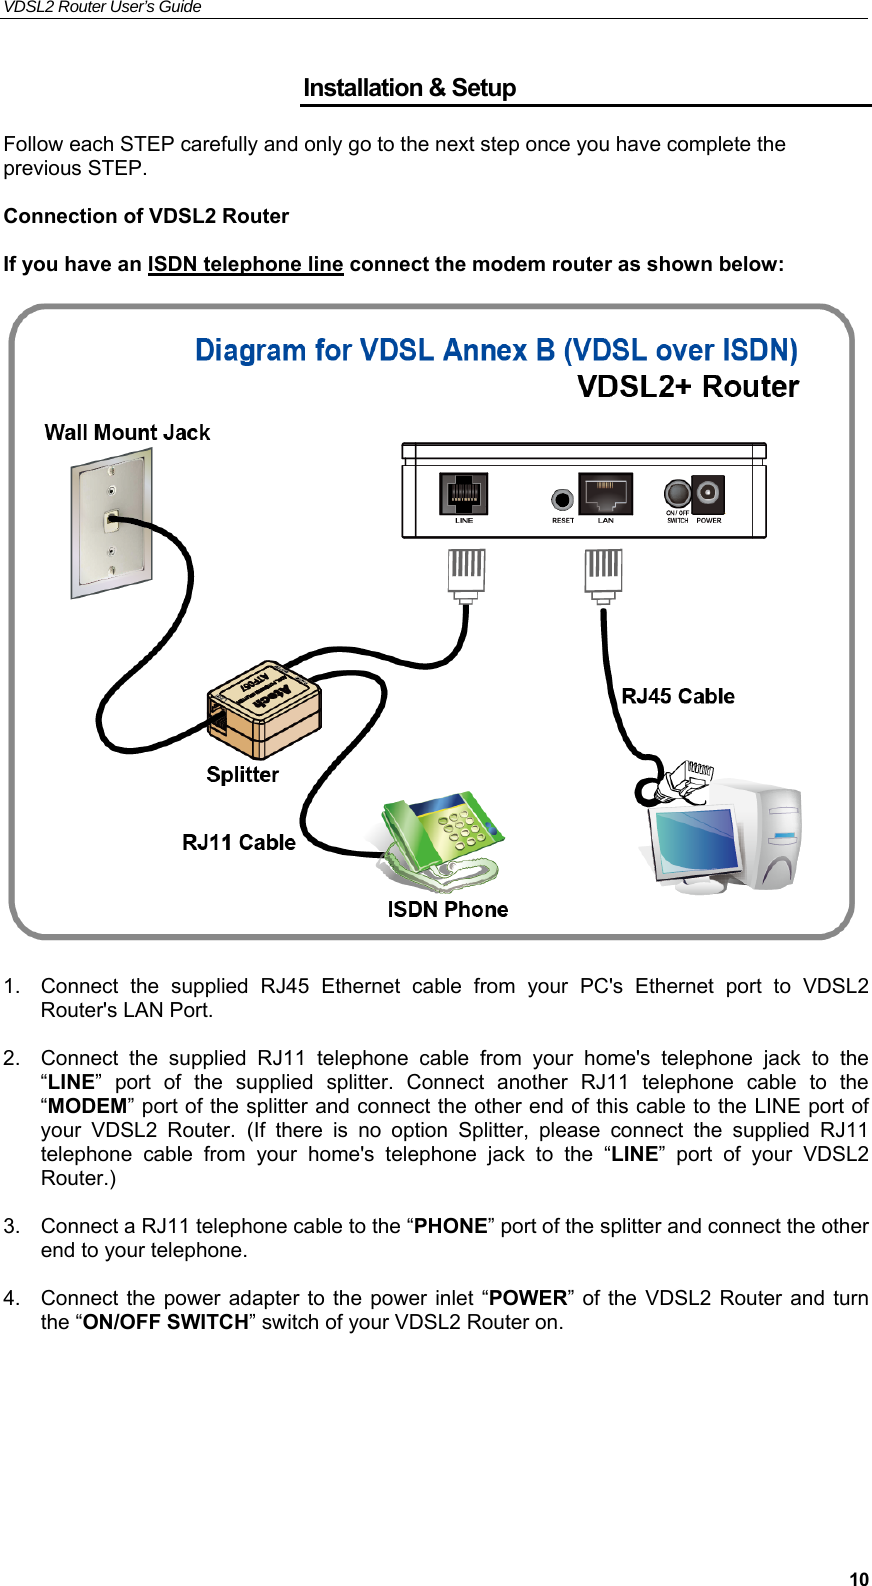 VDSL2 Router User’s Guide     10Installation &amp; Setup Follow each STEP carefully and only go to the next step once you have complete the previous STEP.  Connection of VDSL2 Router  If you have an ISDN telephone line connect the modem router as shown below:     1.  Connect  the  supplied  RJ45  Ethernet  cable  from  your  PC&apos;s  Ethernet  port  to  VDSL2 Router&apos;s LAN Port.  2.  Connect  the  supplied  RJ11  telephone  cable  from  your  home&apos;s  telephone  jack  to  the “LINE”  port  of  the supplied  splitter.  Connect  another  RJ11  telephone  cable  to  the “MODEM” port of the splitter and connect the other end of this cable to the LINE port of your  VDSL2  Router. (If  there  is  no  option  Splitter,  please  connect  the  supplied  RJ11 telephone  cable  from  your  home&apos;s  telephone  jack  to  the  “LINE”  port  of  your  VDSL2 Router.)  3.  Connect a RJ11 telephone cable to the “PHONE” port of the splitter and connect the other end to your telephone.  4.  Connect the  power adapter to the power inlet  “POWER” of  the VDSL2 Router and turn the “ON/OFF SWITCH” switch of your VDSL2 Router on.    